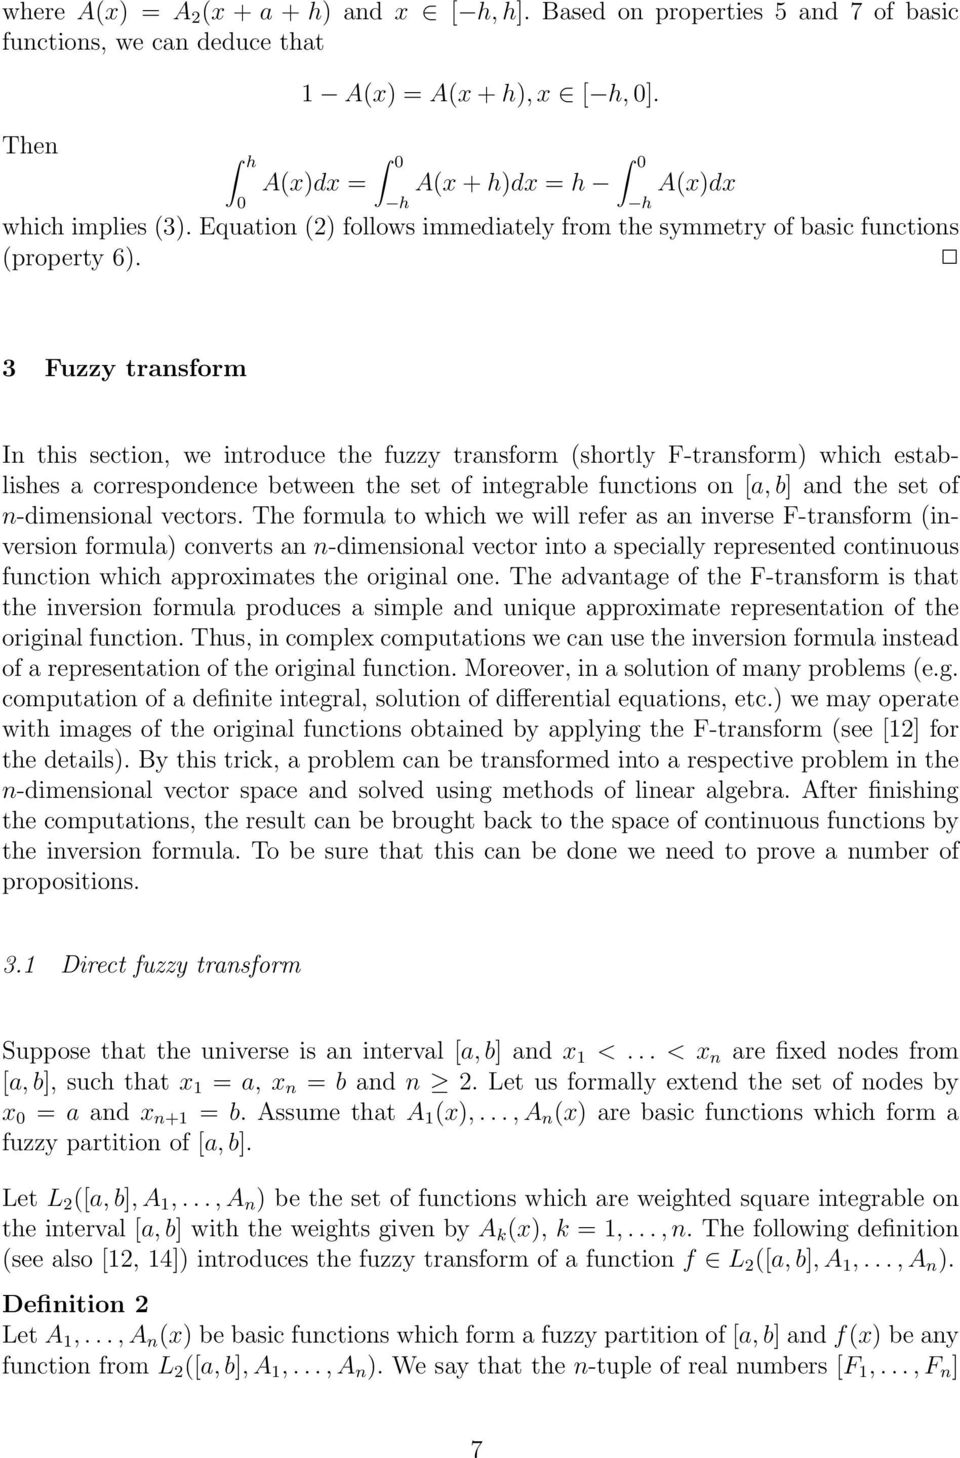 3 Fuzzy transform In this section, we introduce the fuzzy transform (shortly F-transform) which establishes a correspondence between the set of integrable functions on [a,b] and the set of